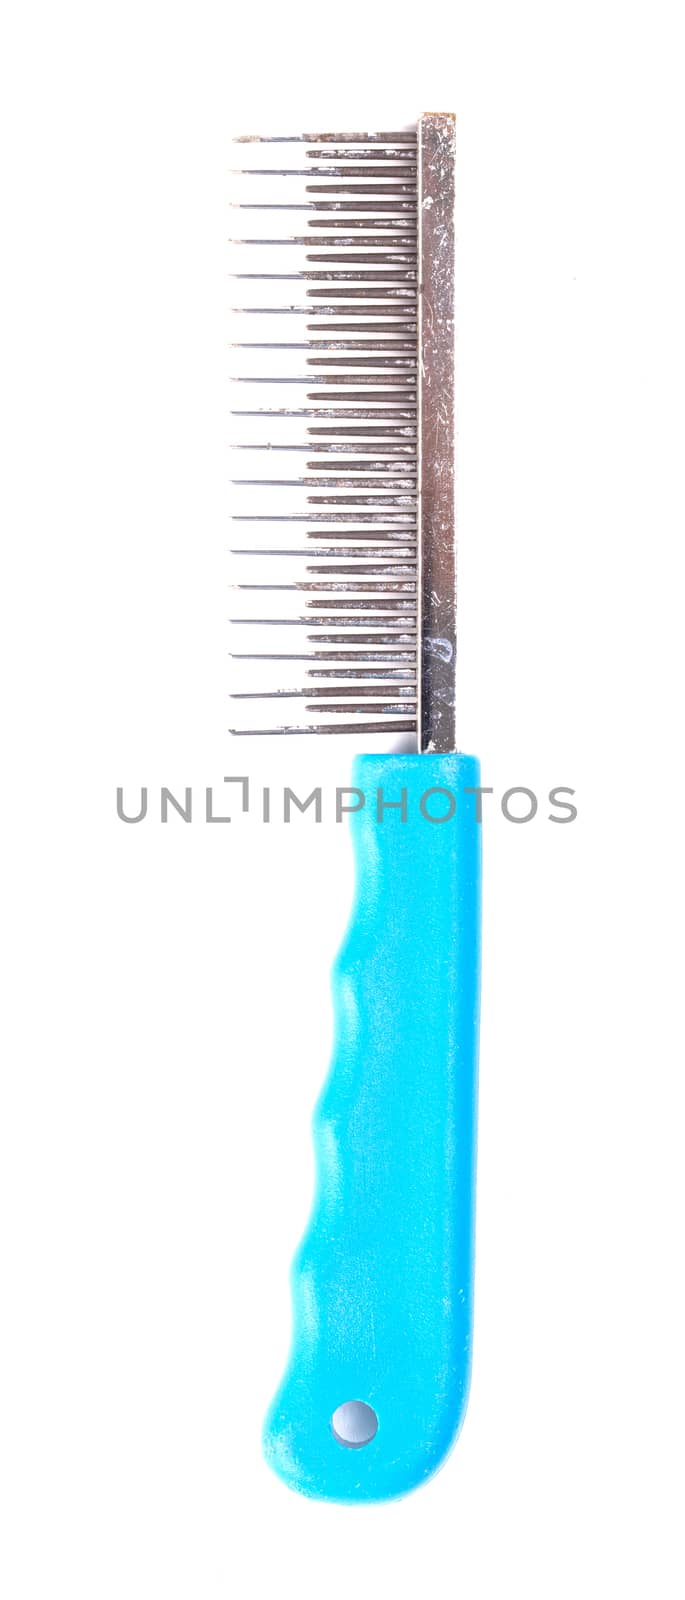 Comb with blue handle for animals with long hair by michaklootwijk